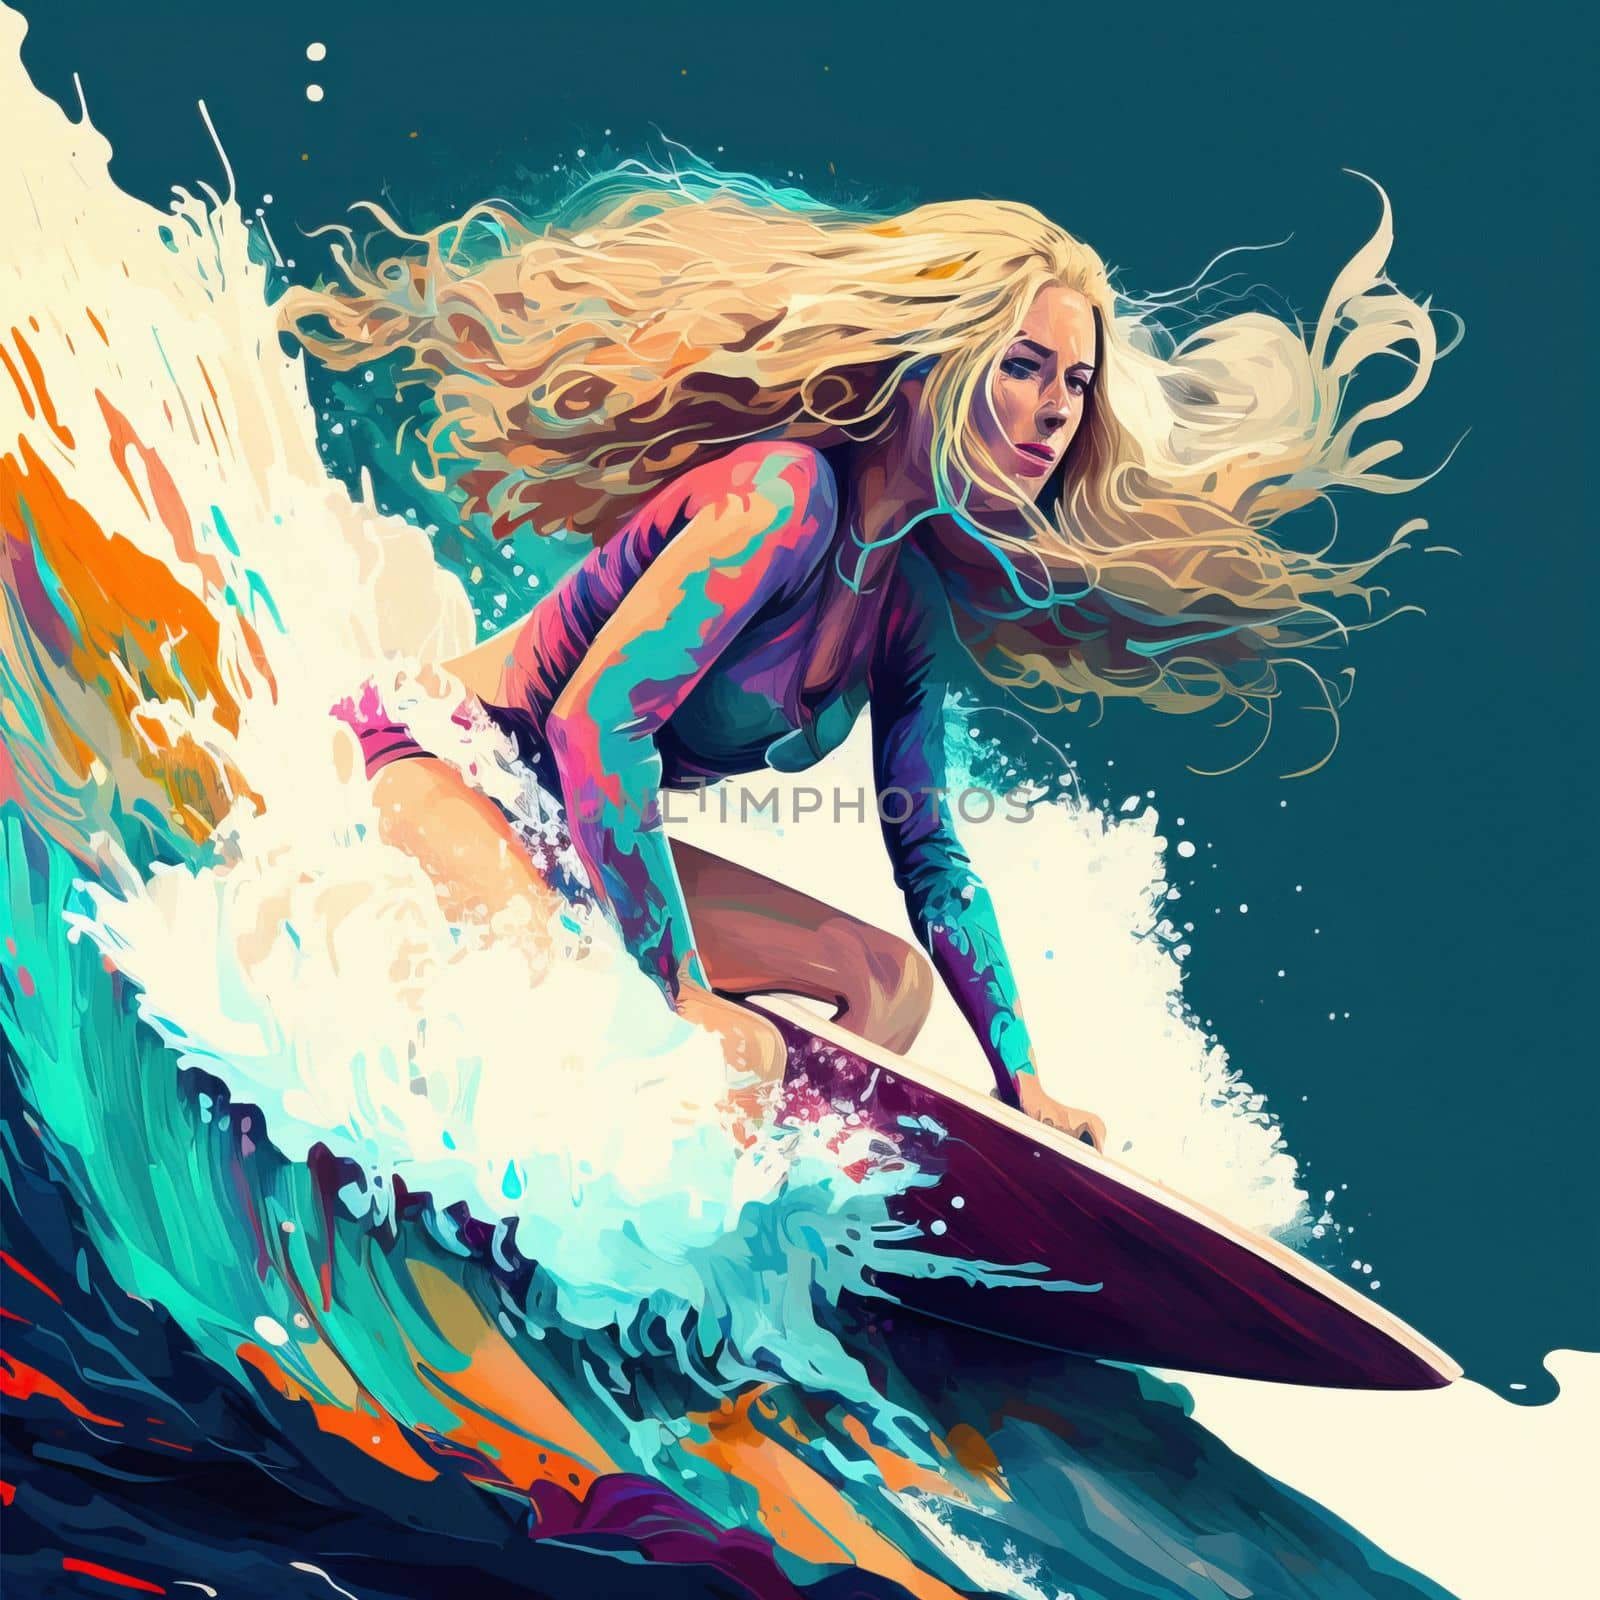 young beautiful woman with long blond hair surfing big wave. Surf girl on surfboard. Woman in ocean during surfing. Surfer and ocean wave by igor010